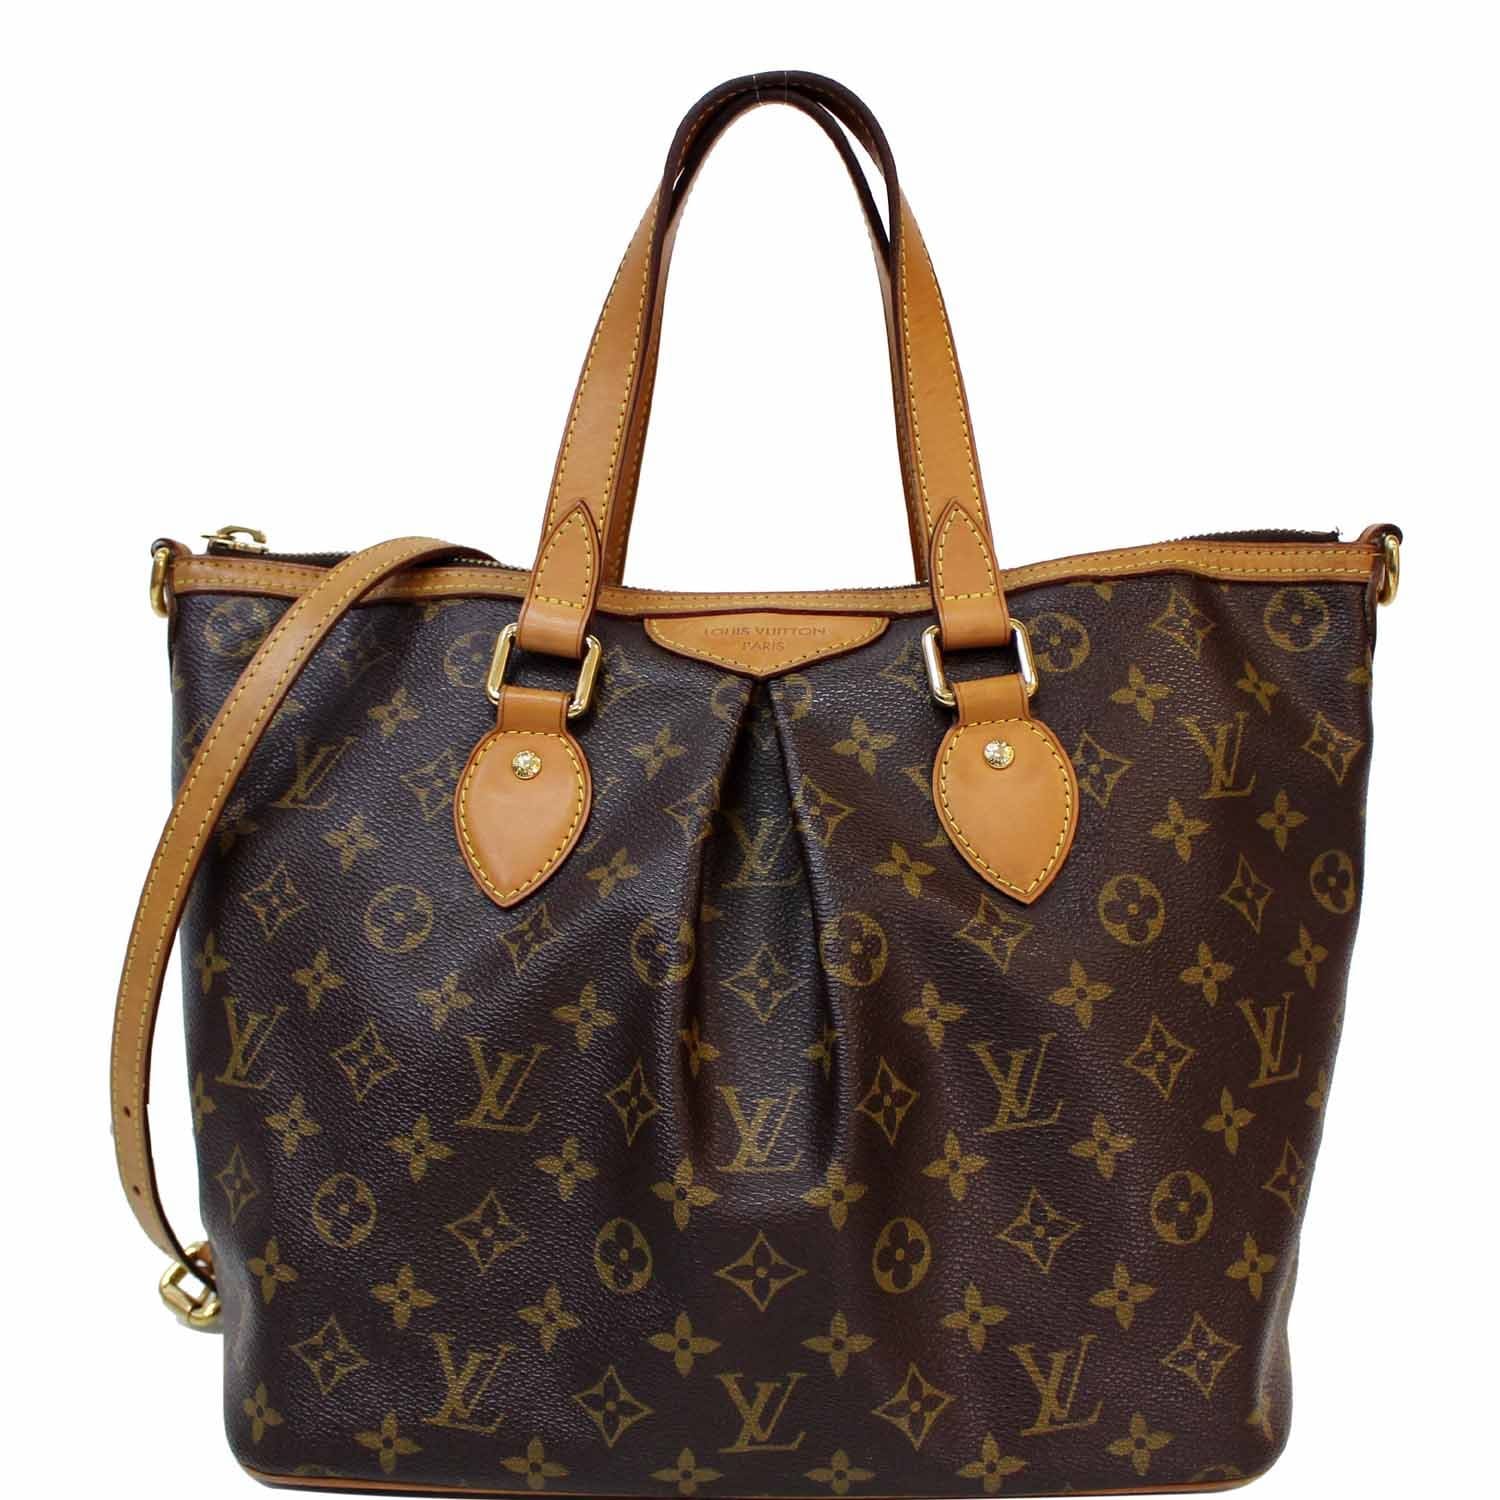 Pin by 𝒩 on BAG  Bags, Vuitton, Louis vuitton